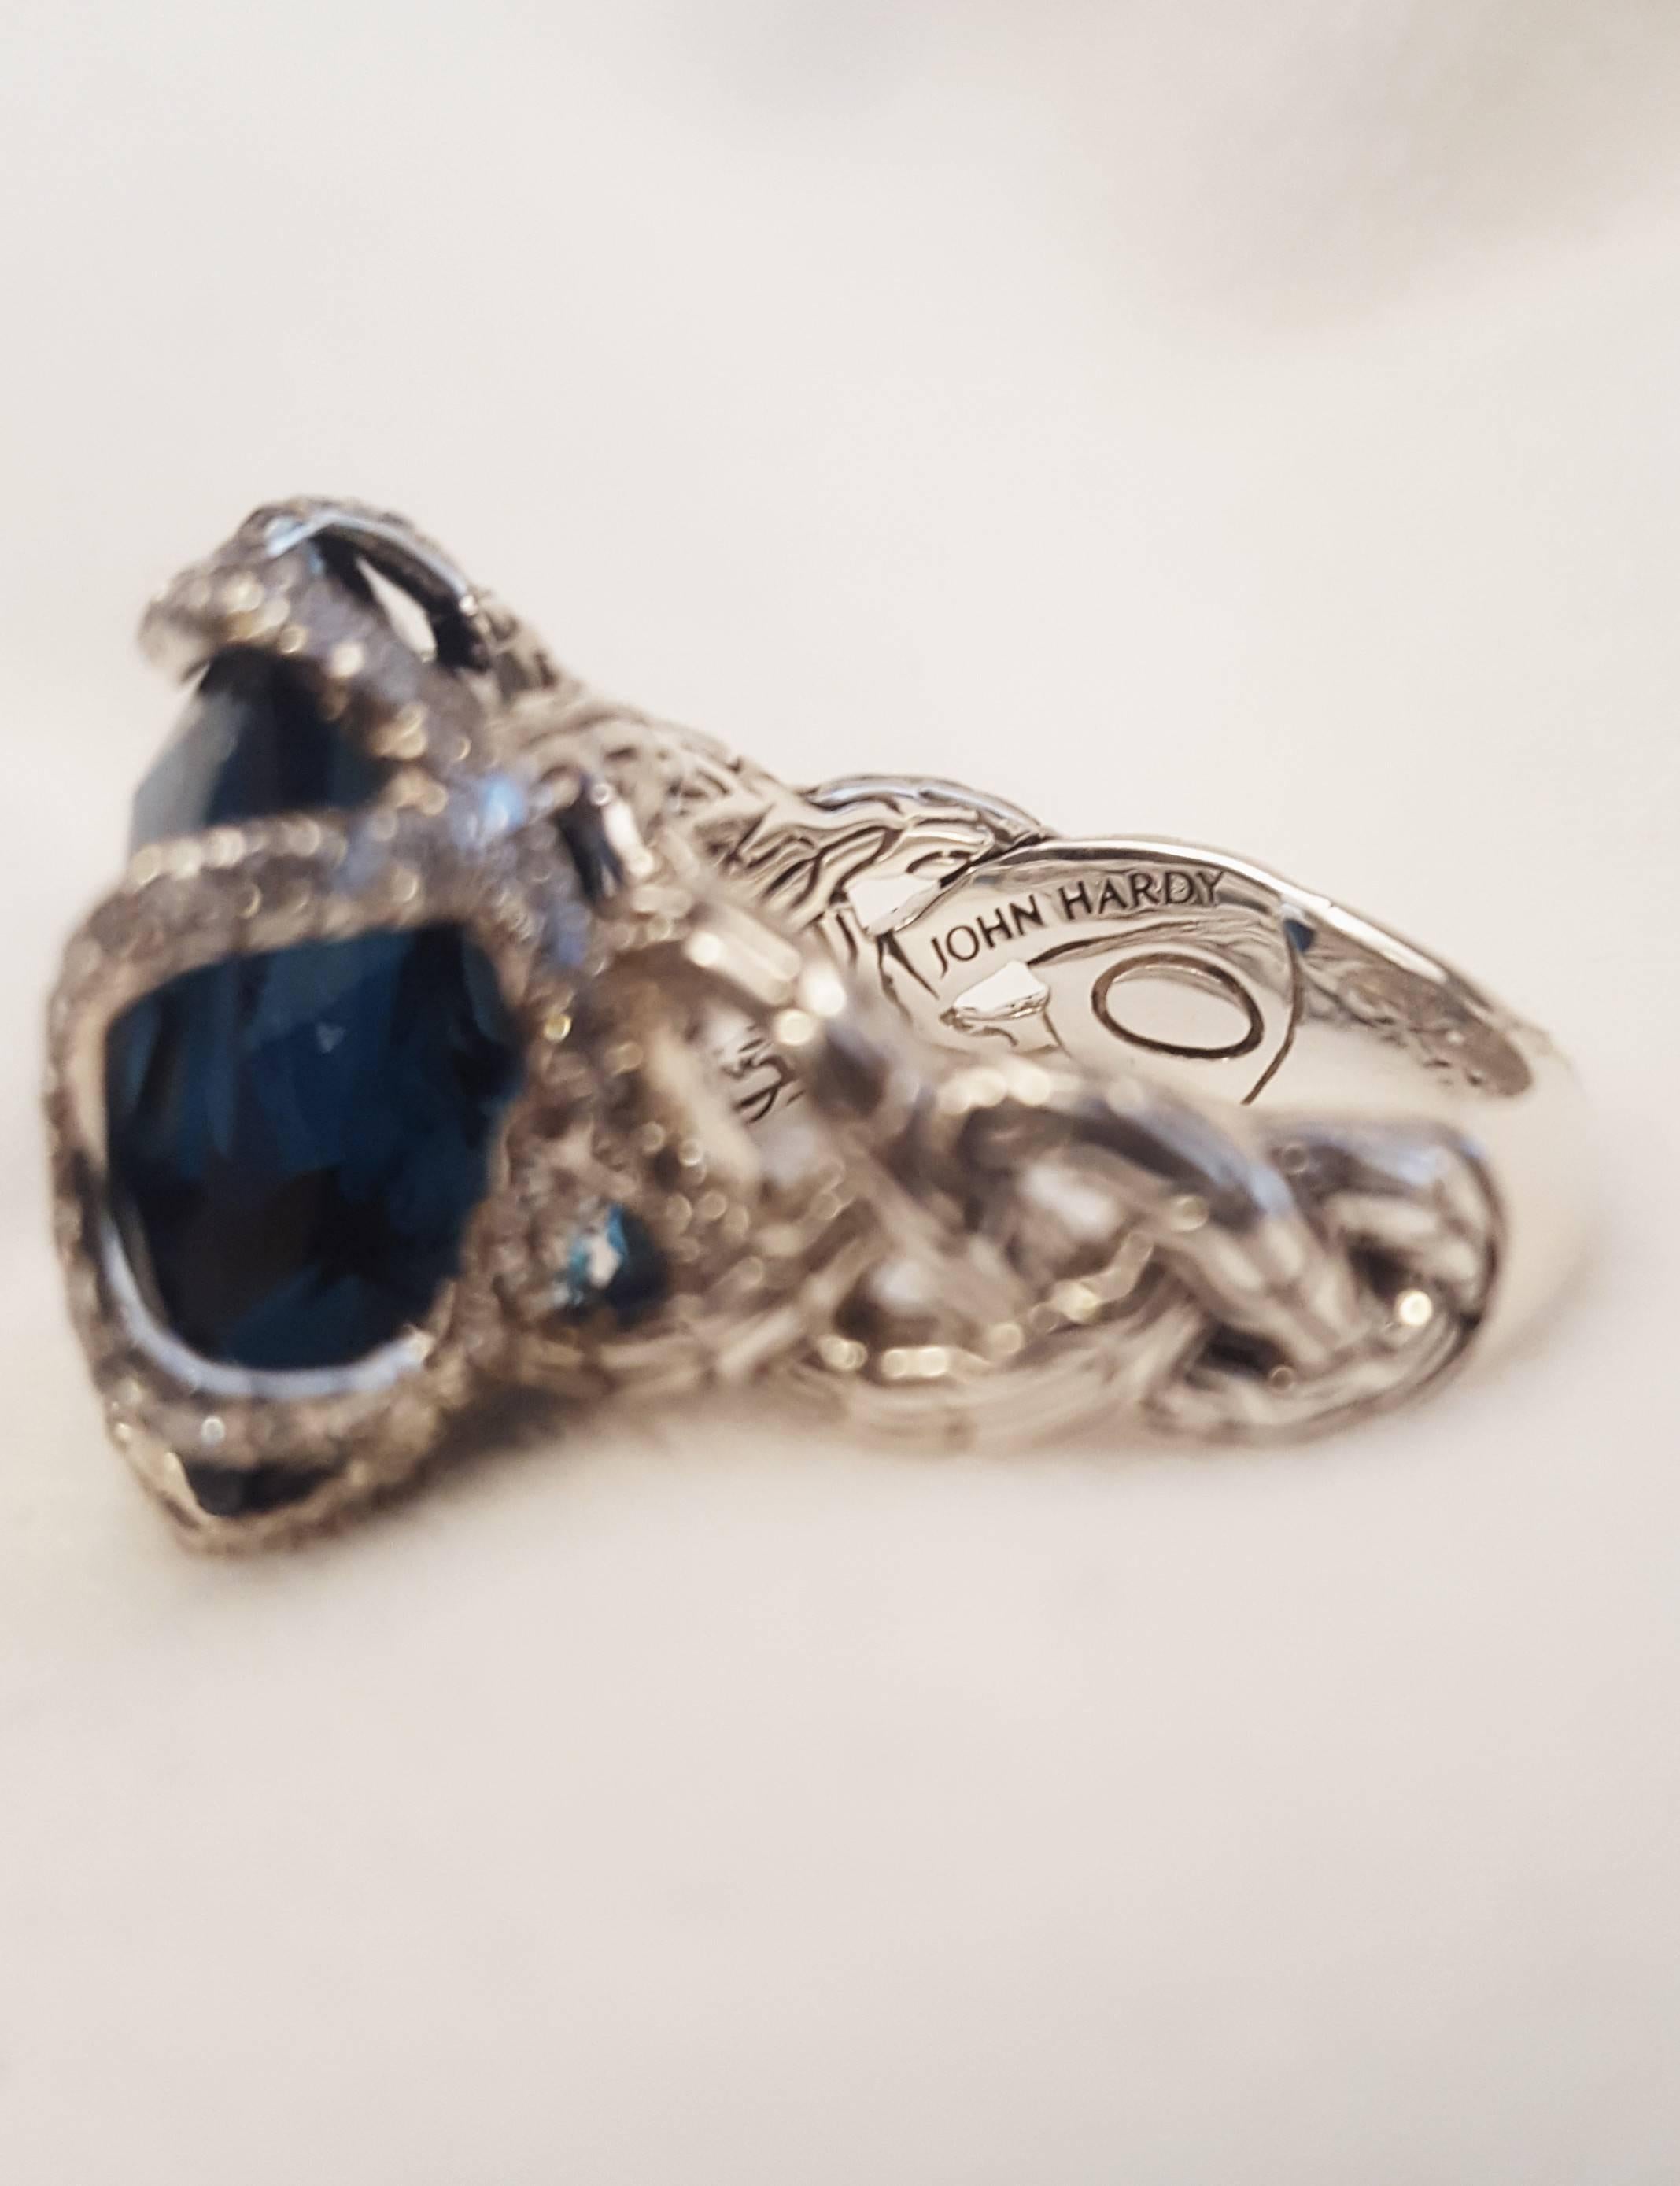 John Hardy has stayed true to the authentic jewelry-making techniques of the Balinese royal courts.  Each one of a kind treasure is meticulously hand crafted with focused attention to detail.  This fabulous ring features a faceted cushion cut blue